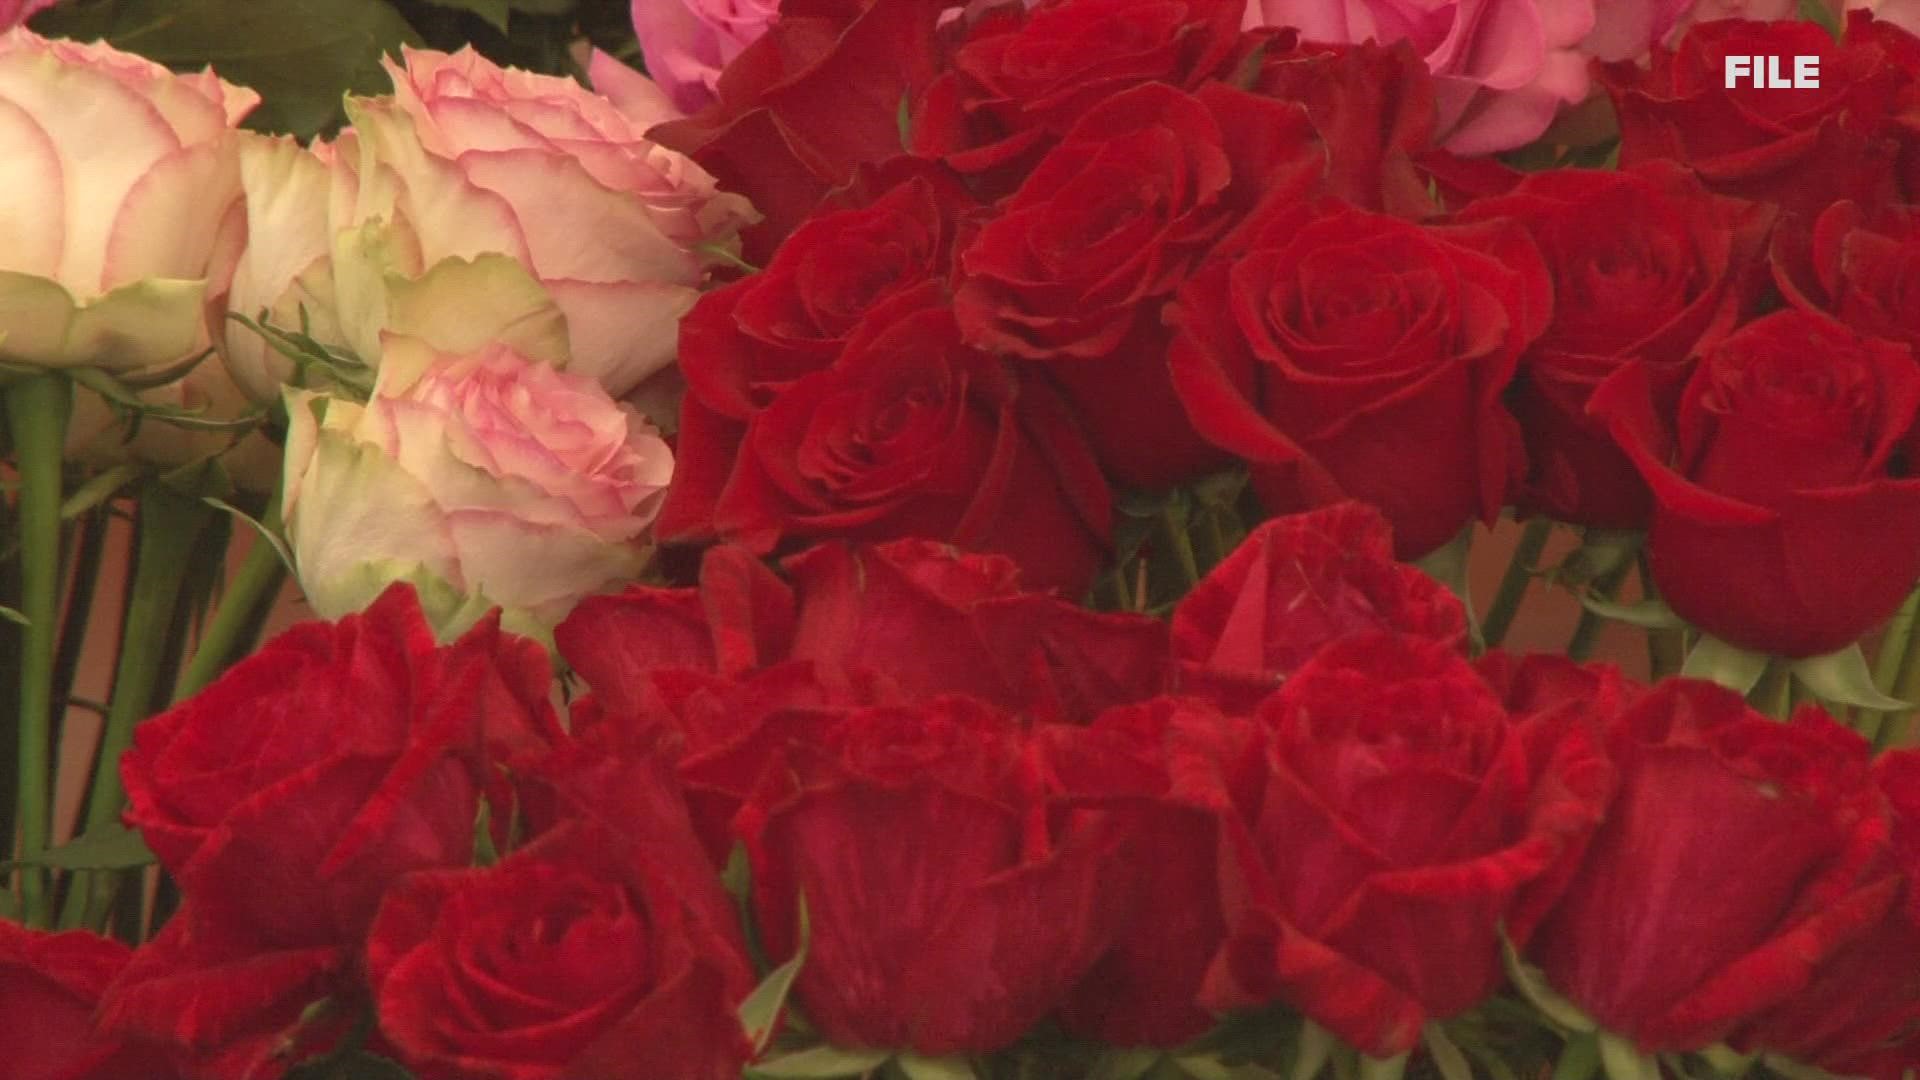 Some florists in Maine are having a hard time getting certain flowers, and the ones they have are pretty pricey.